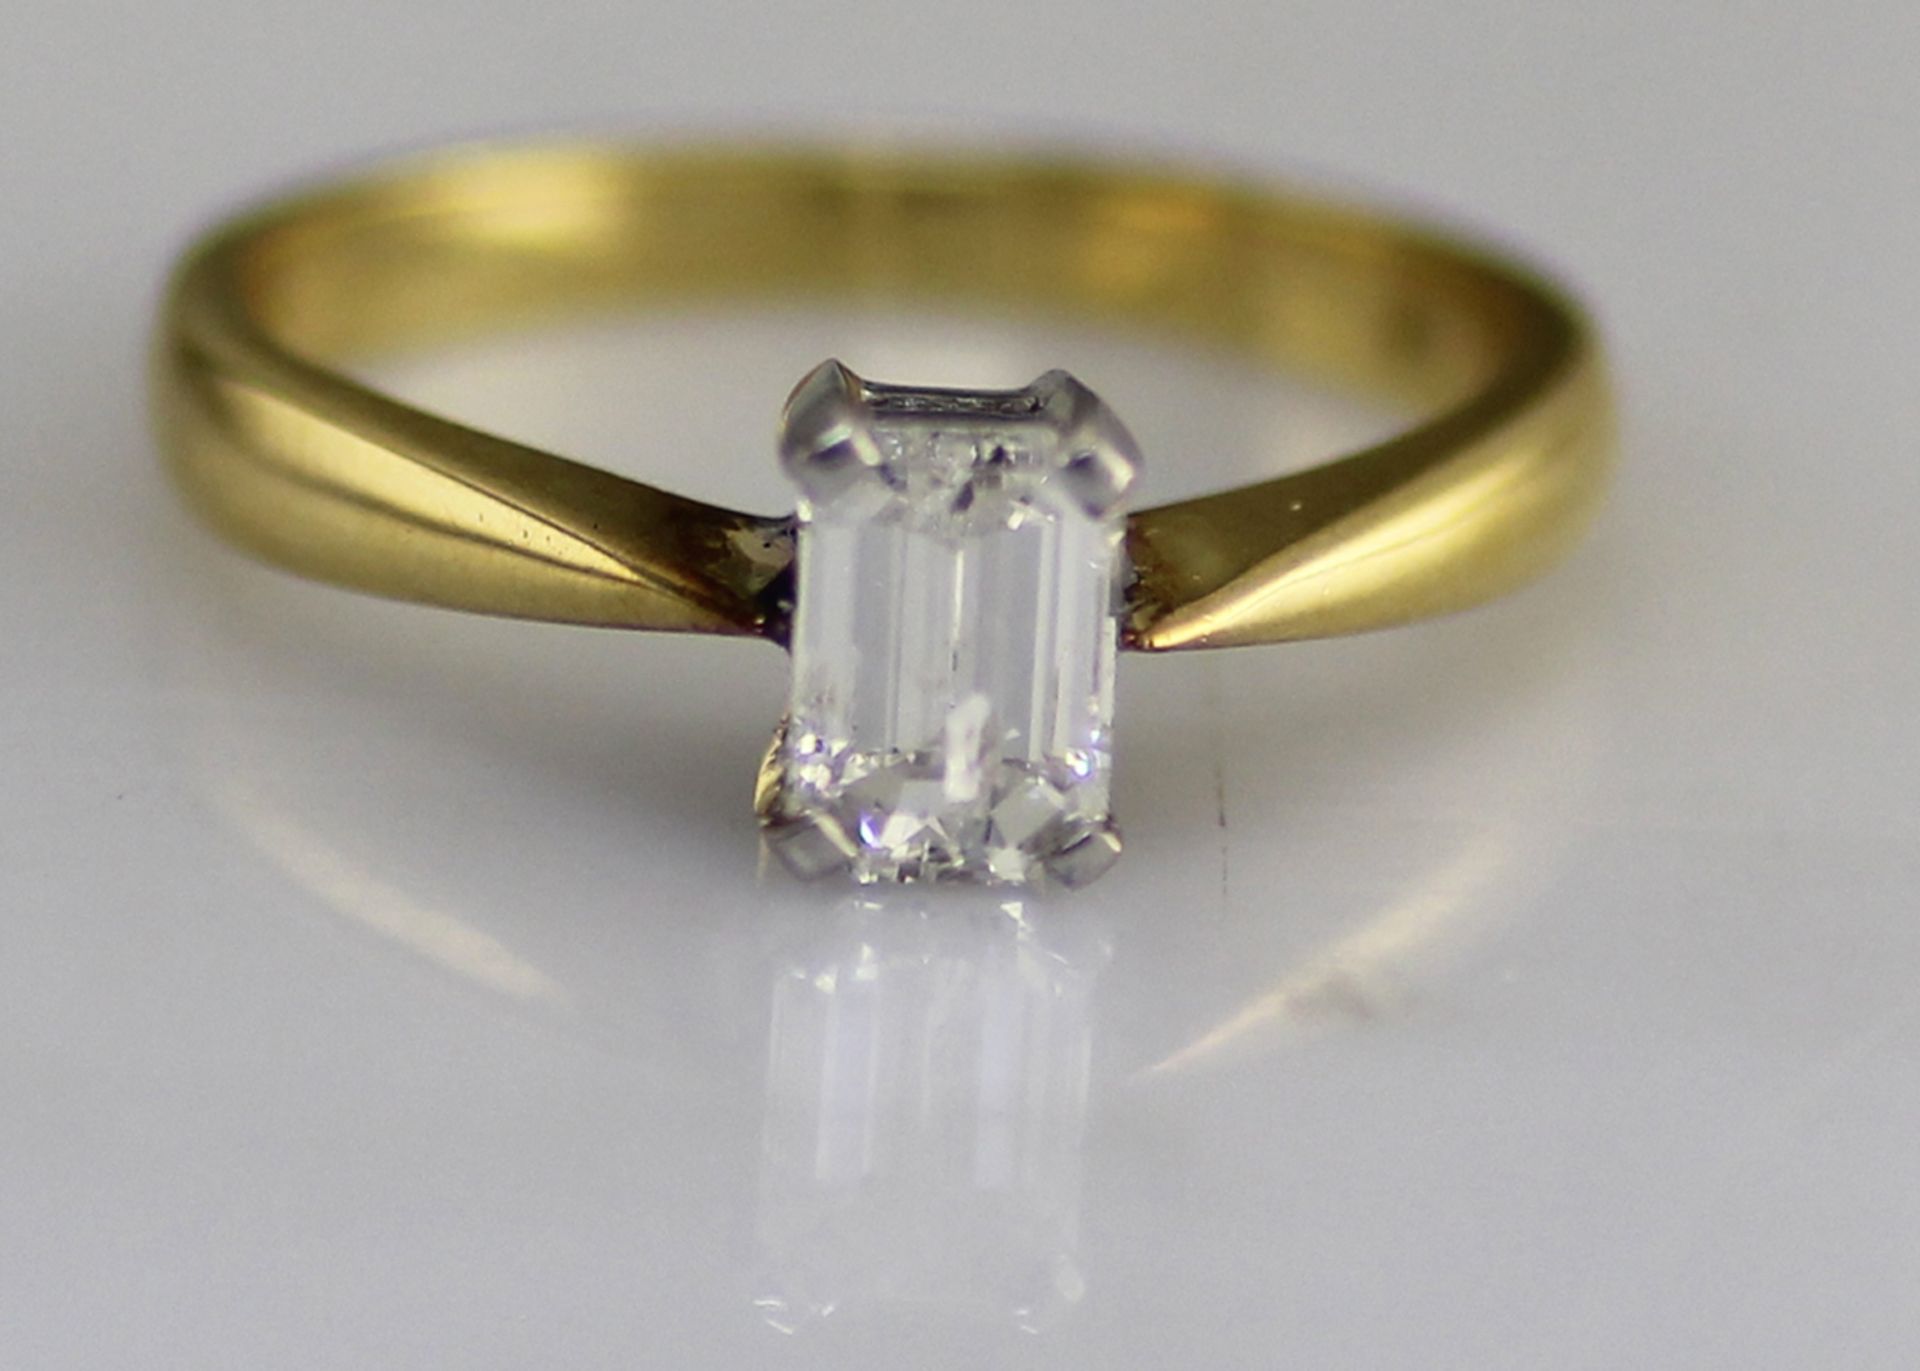 18ct Single Stone Emerald Cut Diamond Ring D SI3 0.72 Carats - Valued by GIE £11,495.00 - A stunning - Image 7 of 9